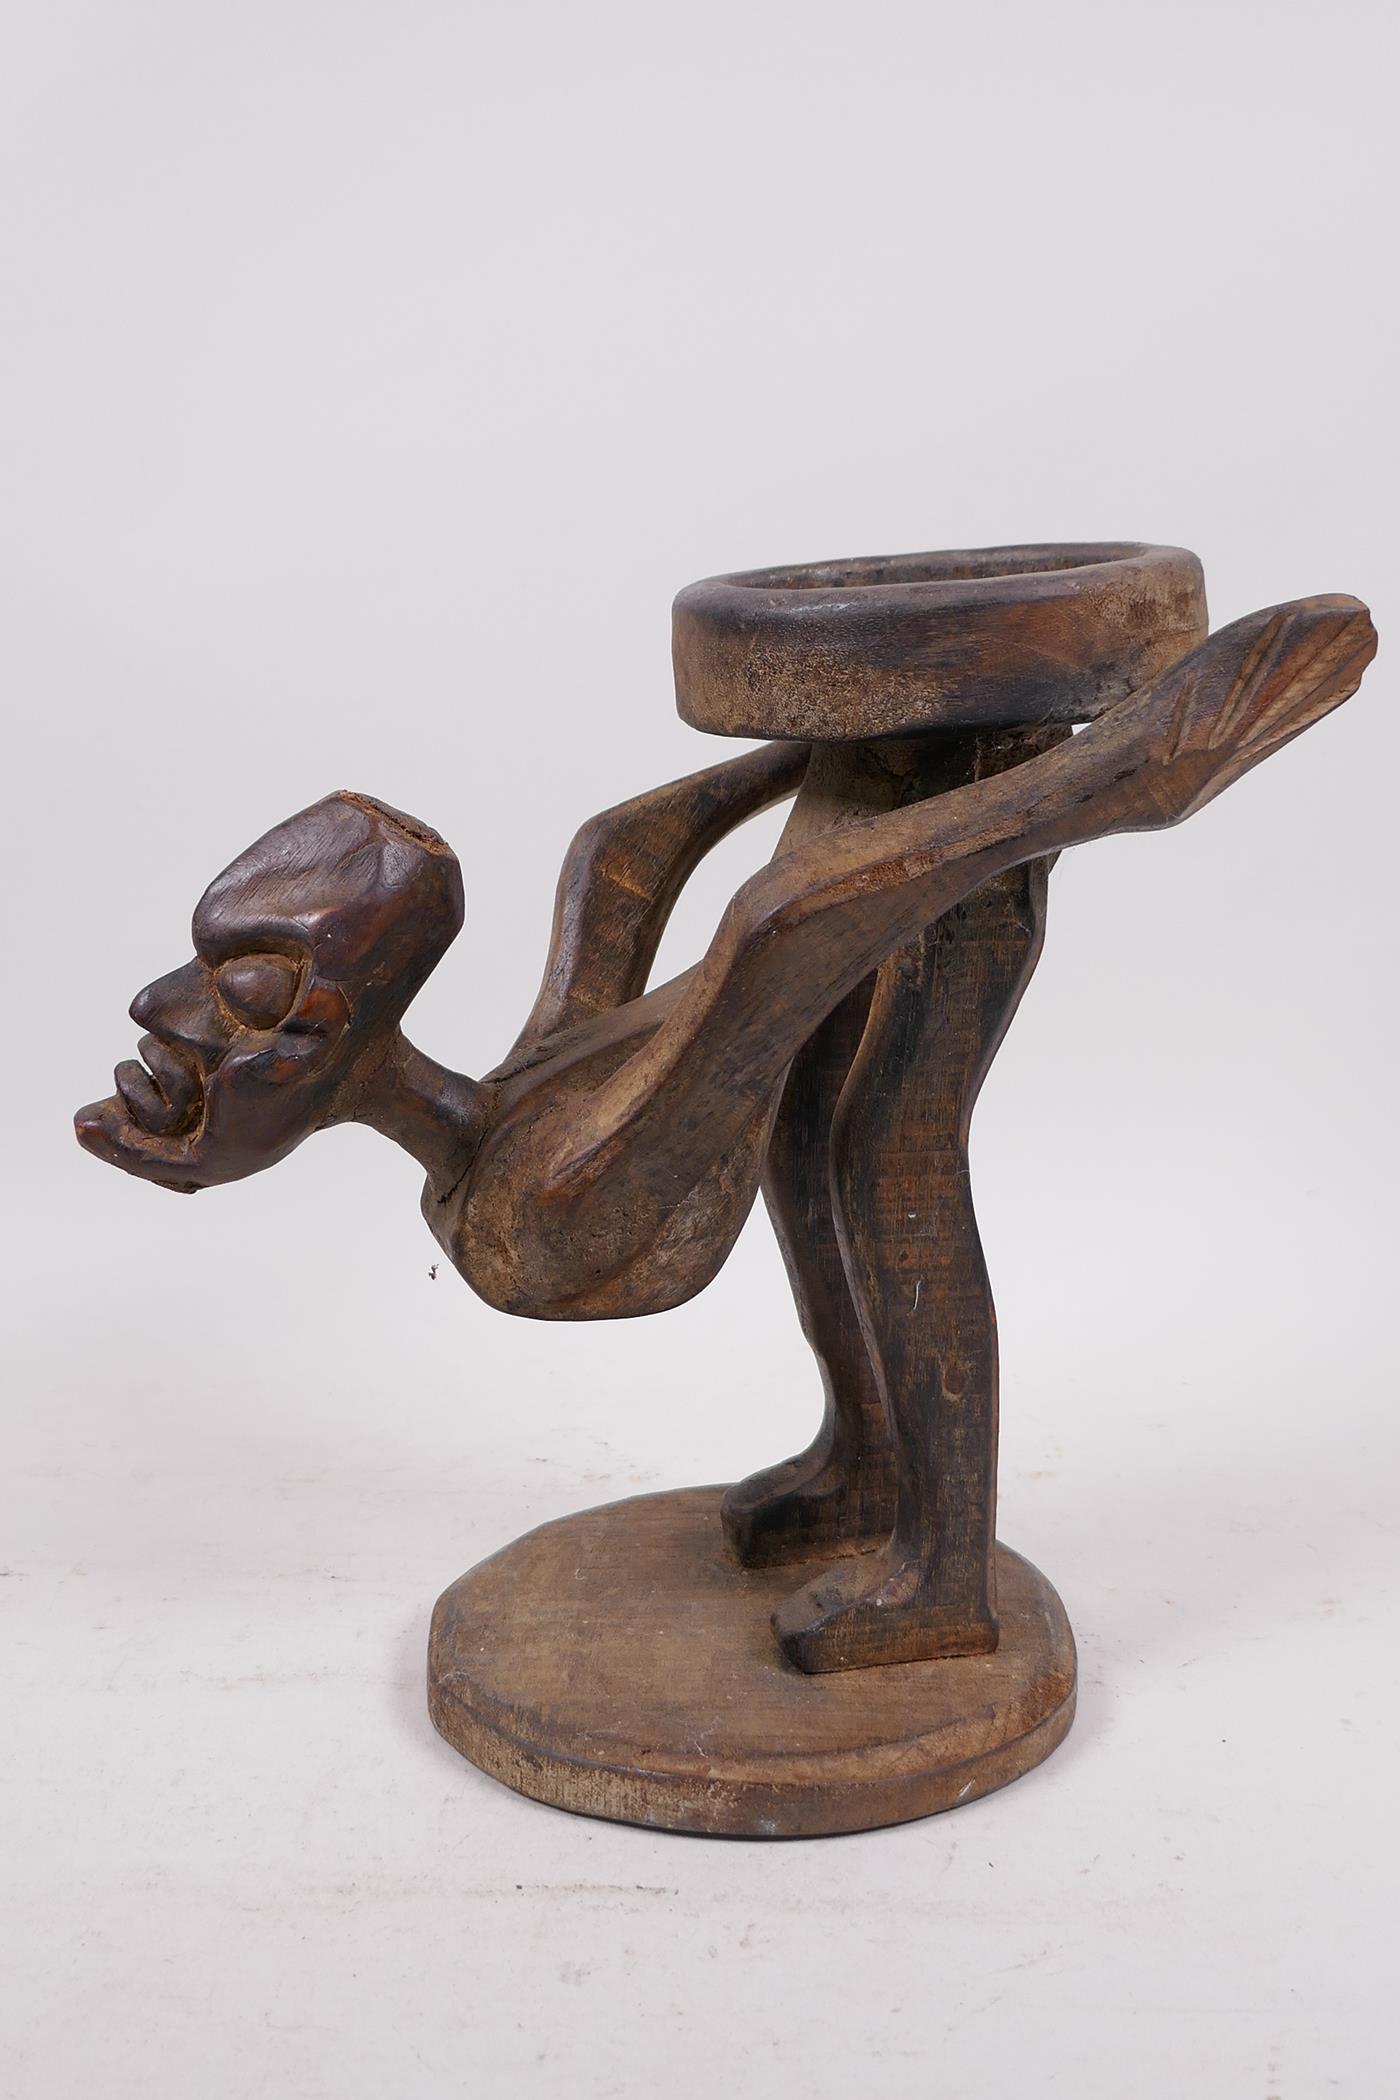 An unusual Indonesian wood figure carved as a stand, 9" high